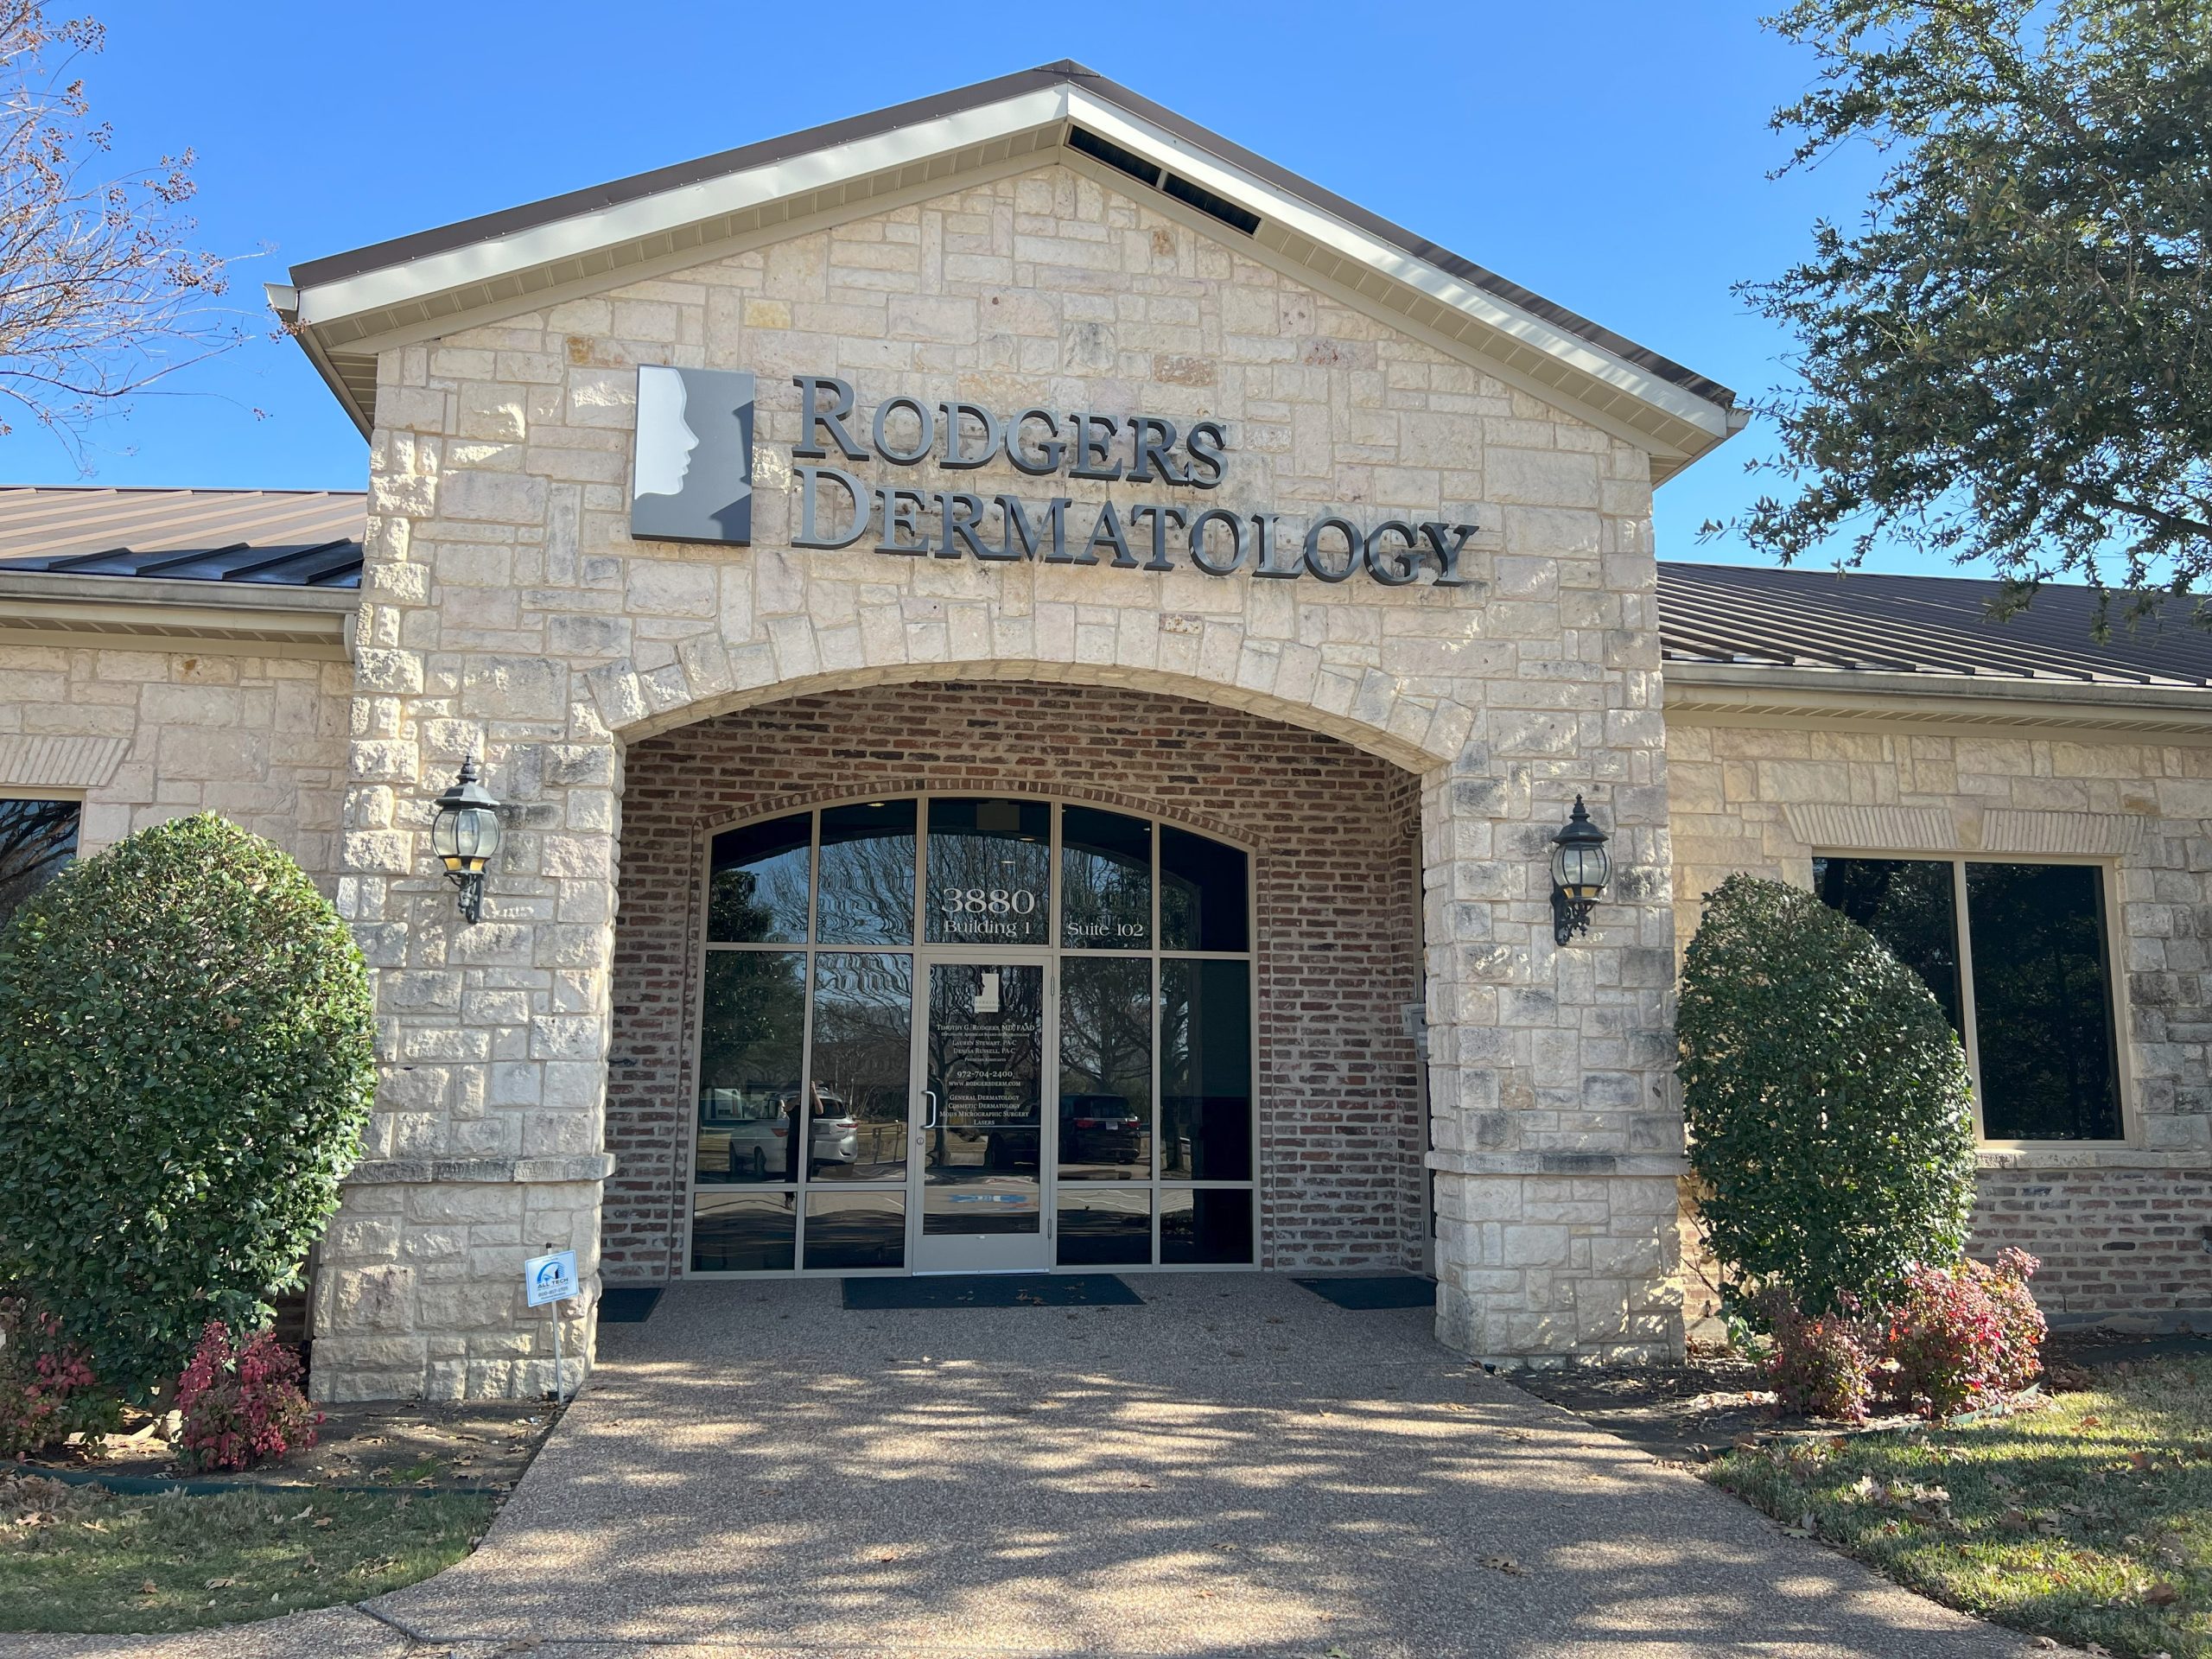 The White Brick Arch And Inset, Red Brick Facade Of Rodgers Dermatology In Frisco, TX